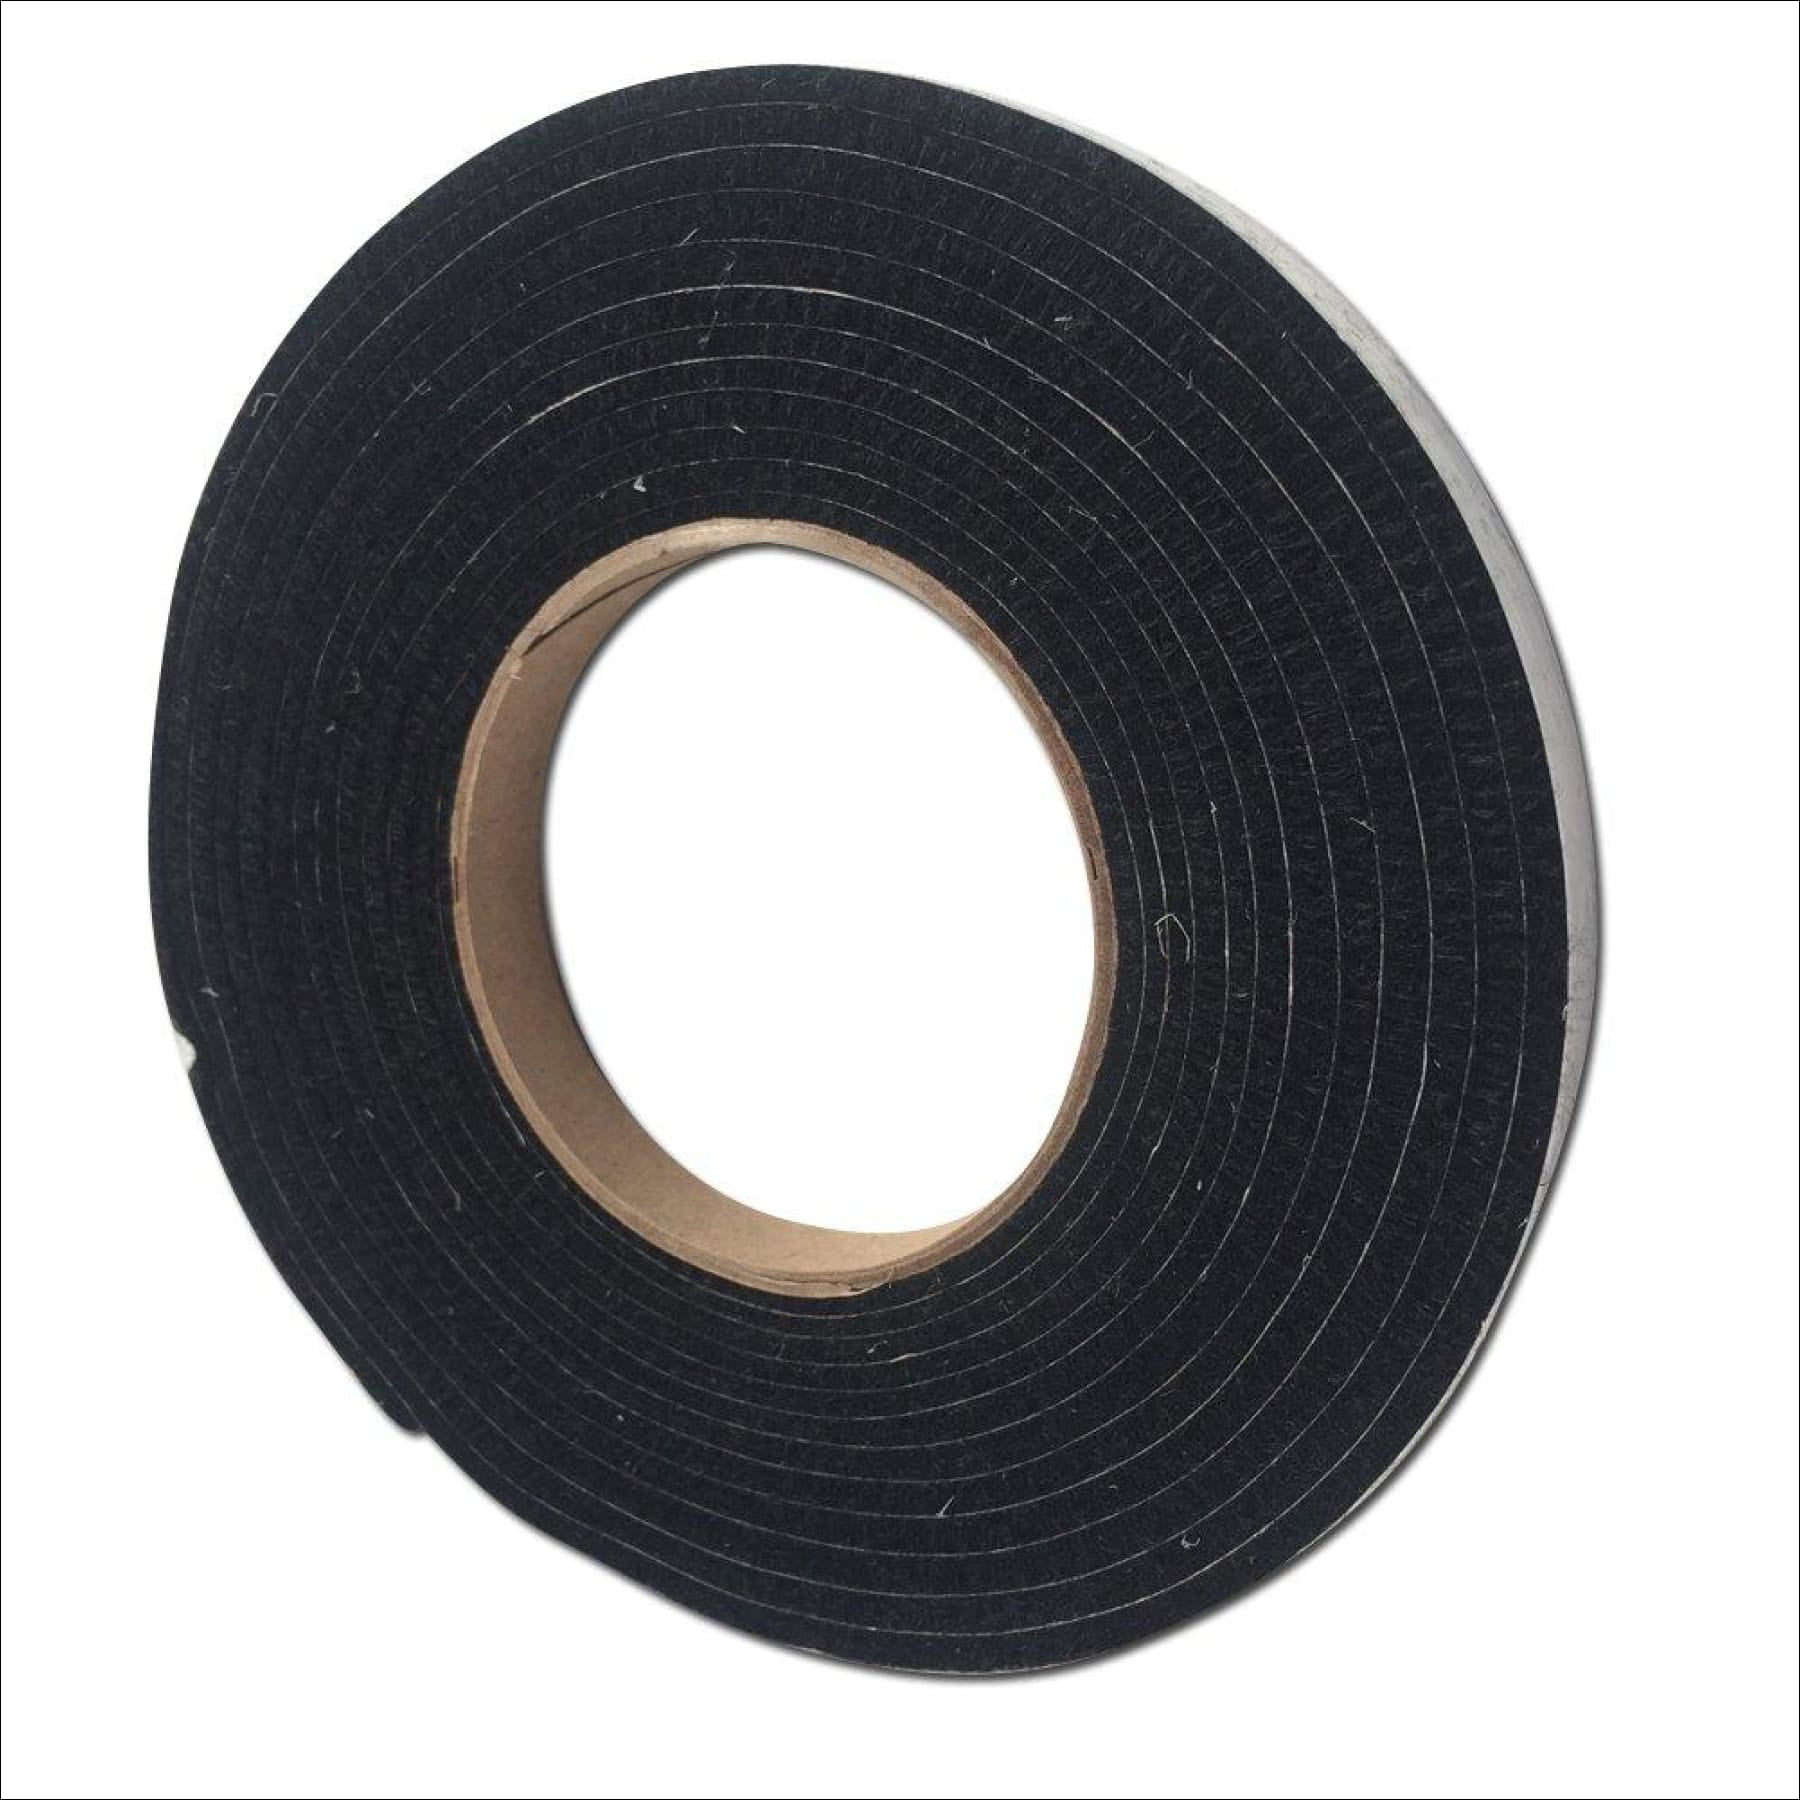 BBQ Smoker Gasket Barbecue Door Lid Seal Adhesive Heat Grill Seal 1/8 Inch Thick 